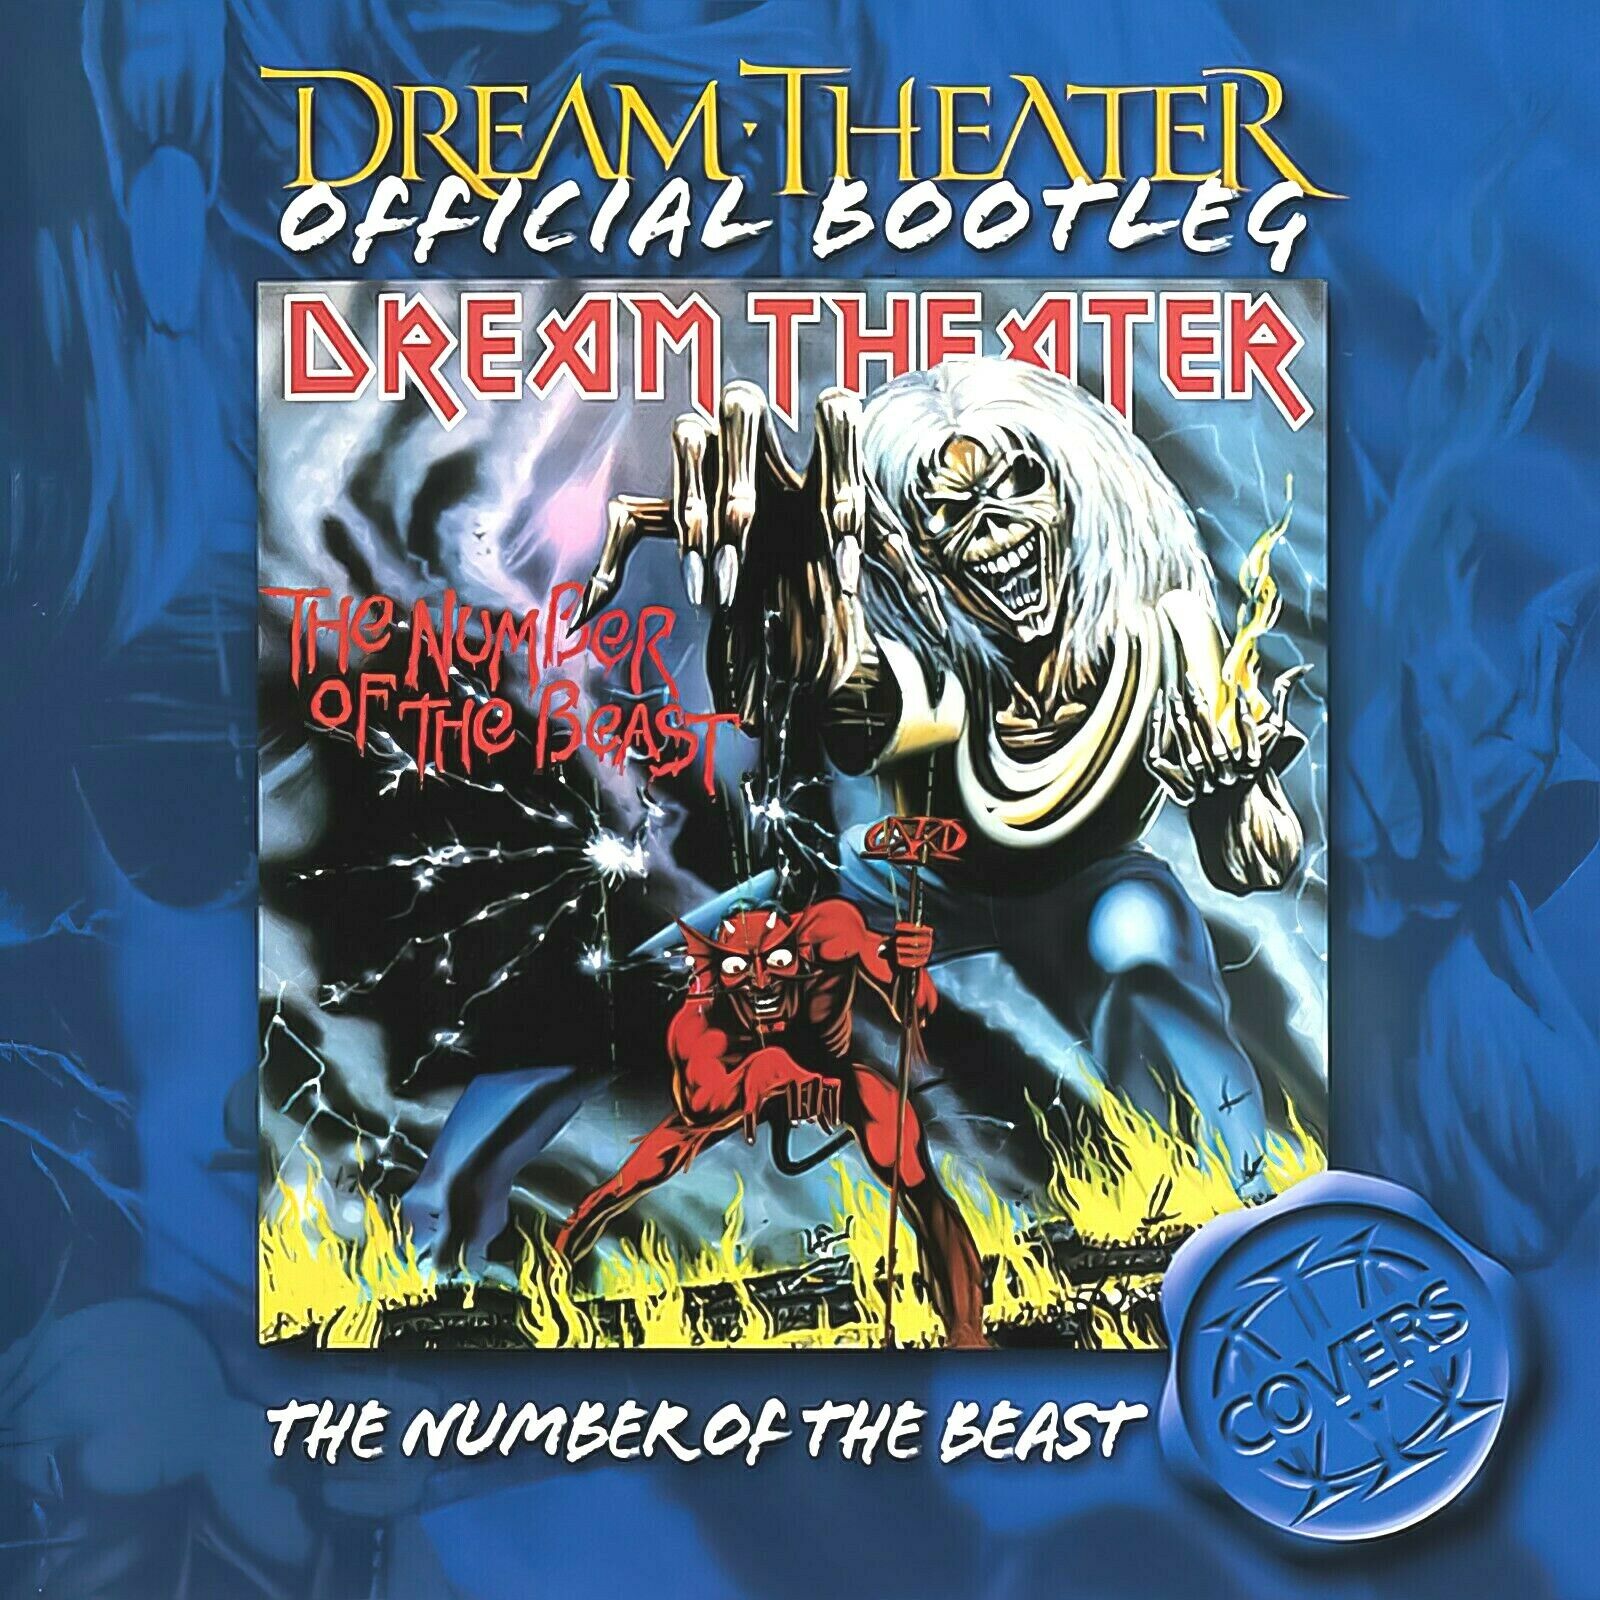 Dream Theater The Number Of The Beast COVERS 12x12 Album Cover Replica Poster